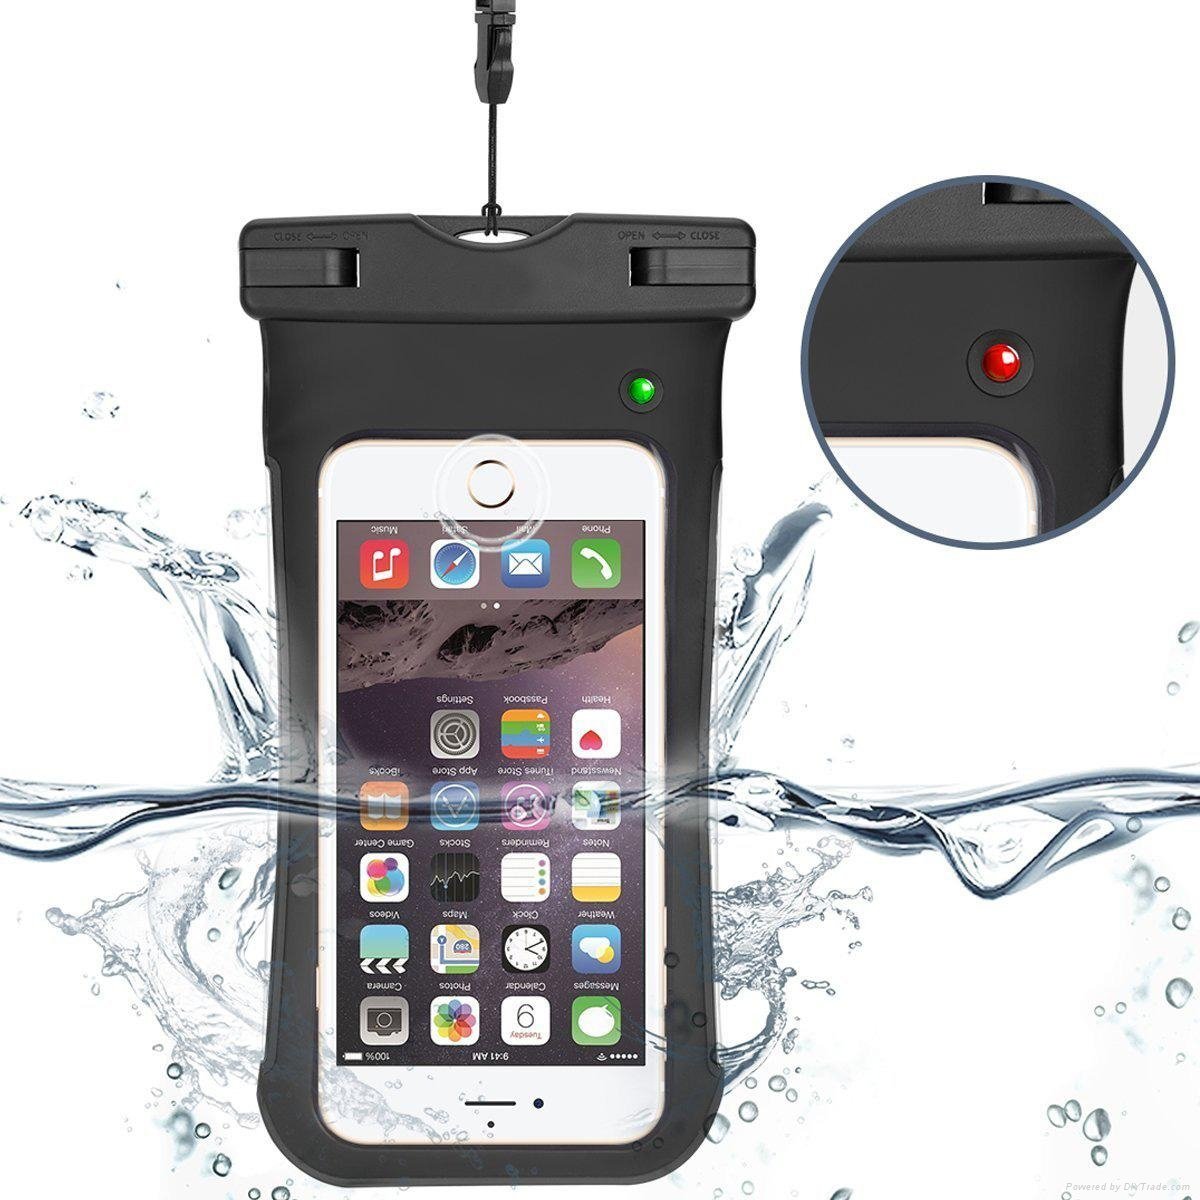 The World First Water Leakage Alarm System Waterproof Dry Bag for Smartphones